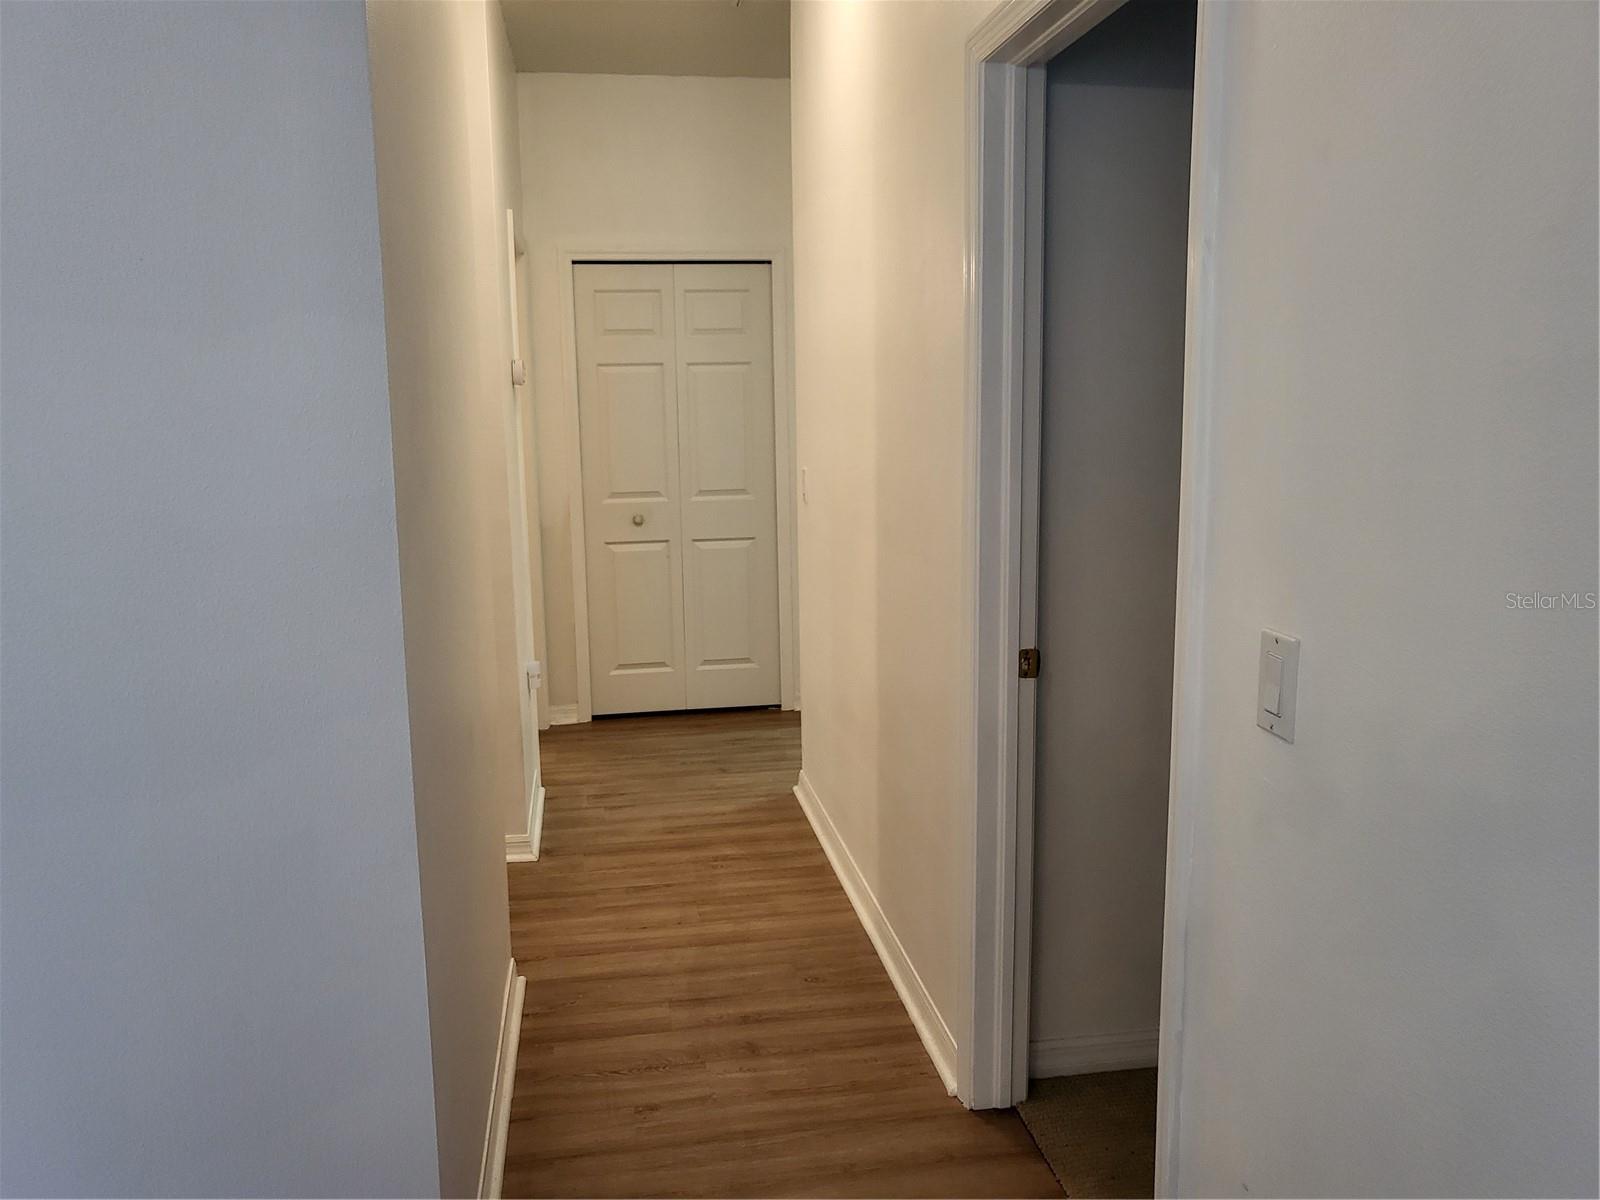 CORRIDOR TO BEDROOMS AND UTILITY ROOM